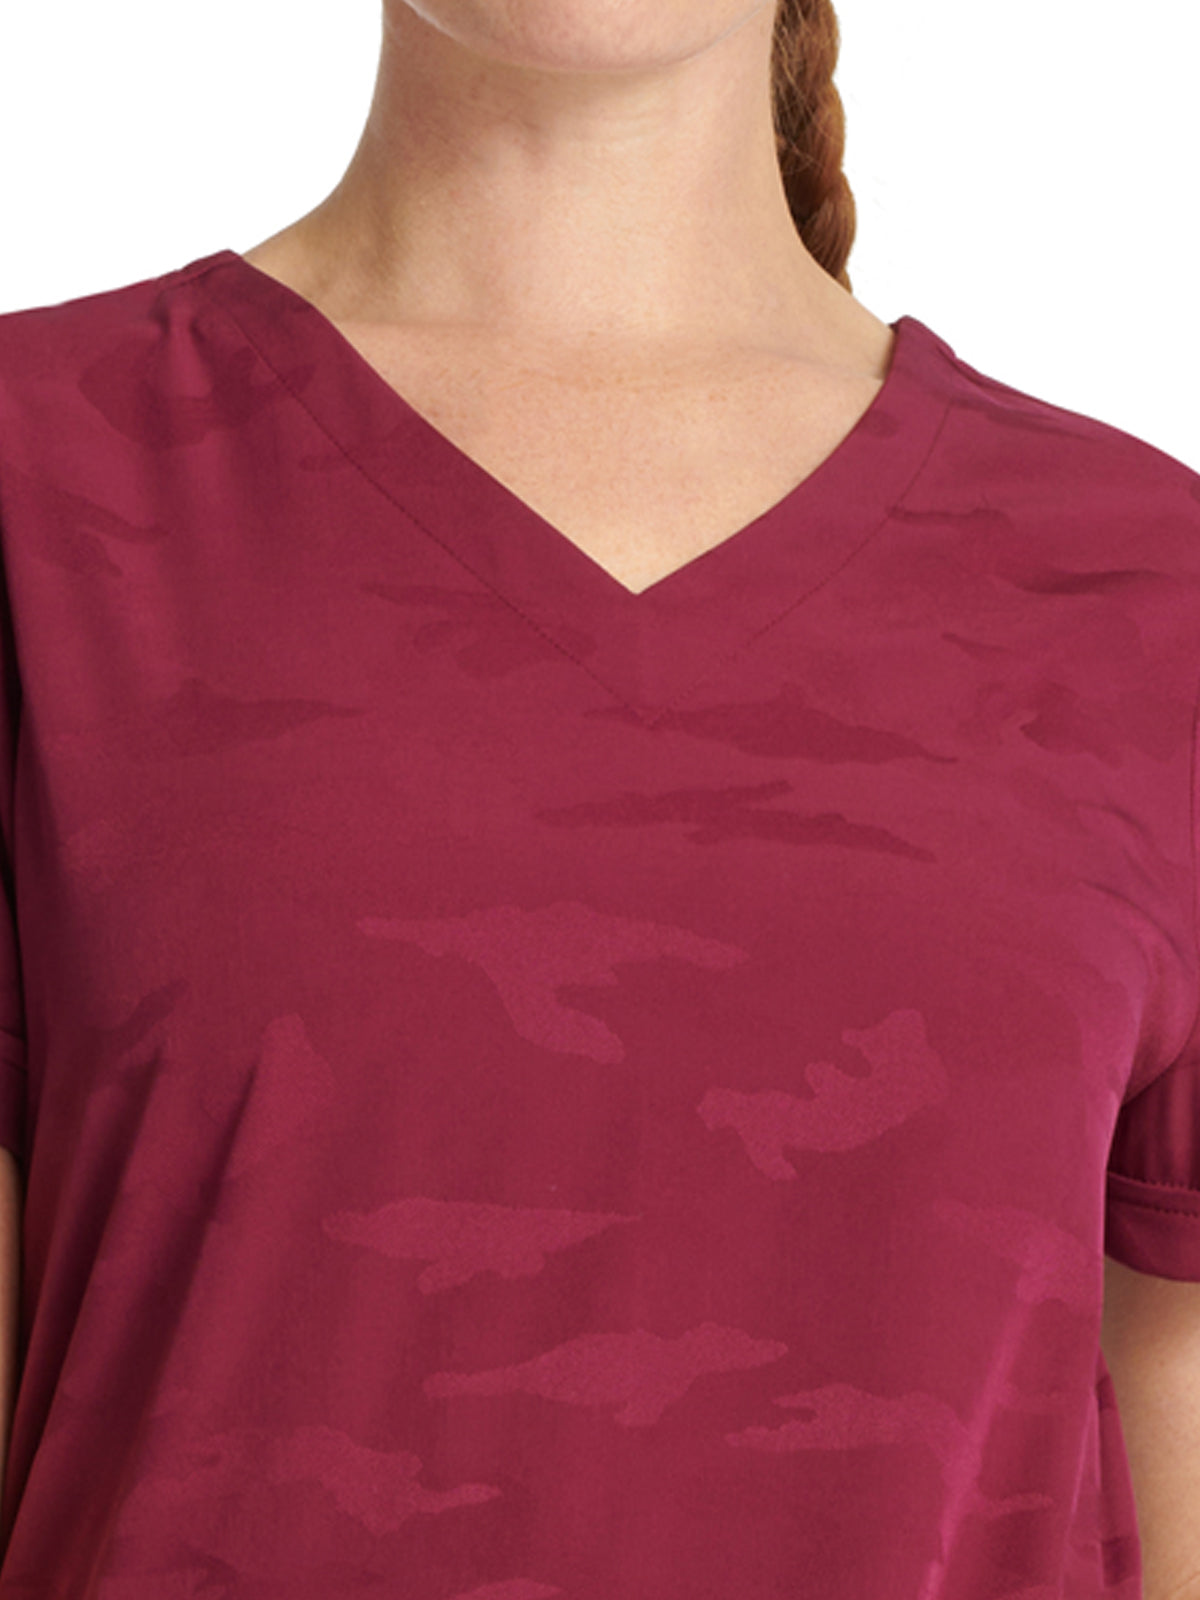 Women's Curved V-Neck Top